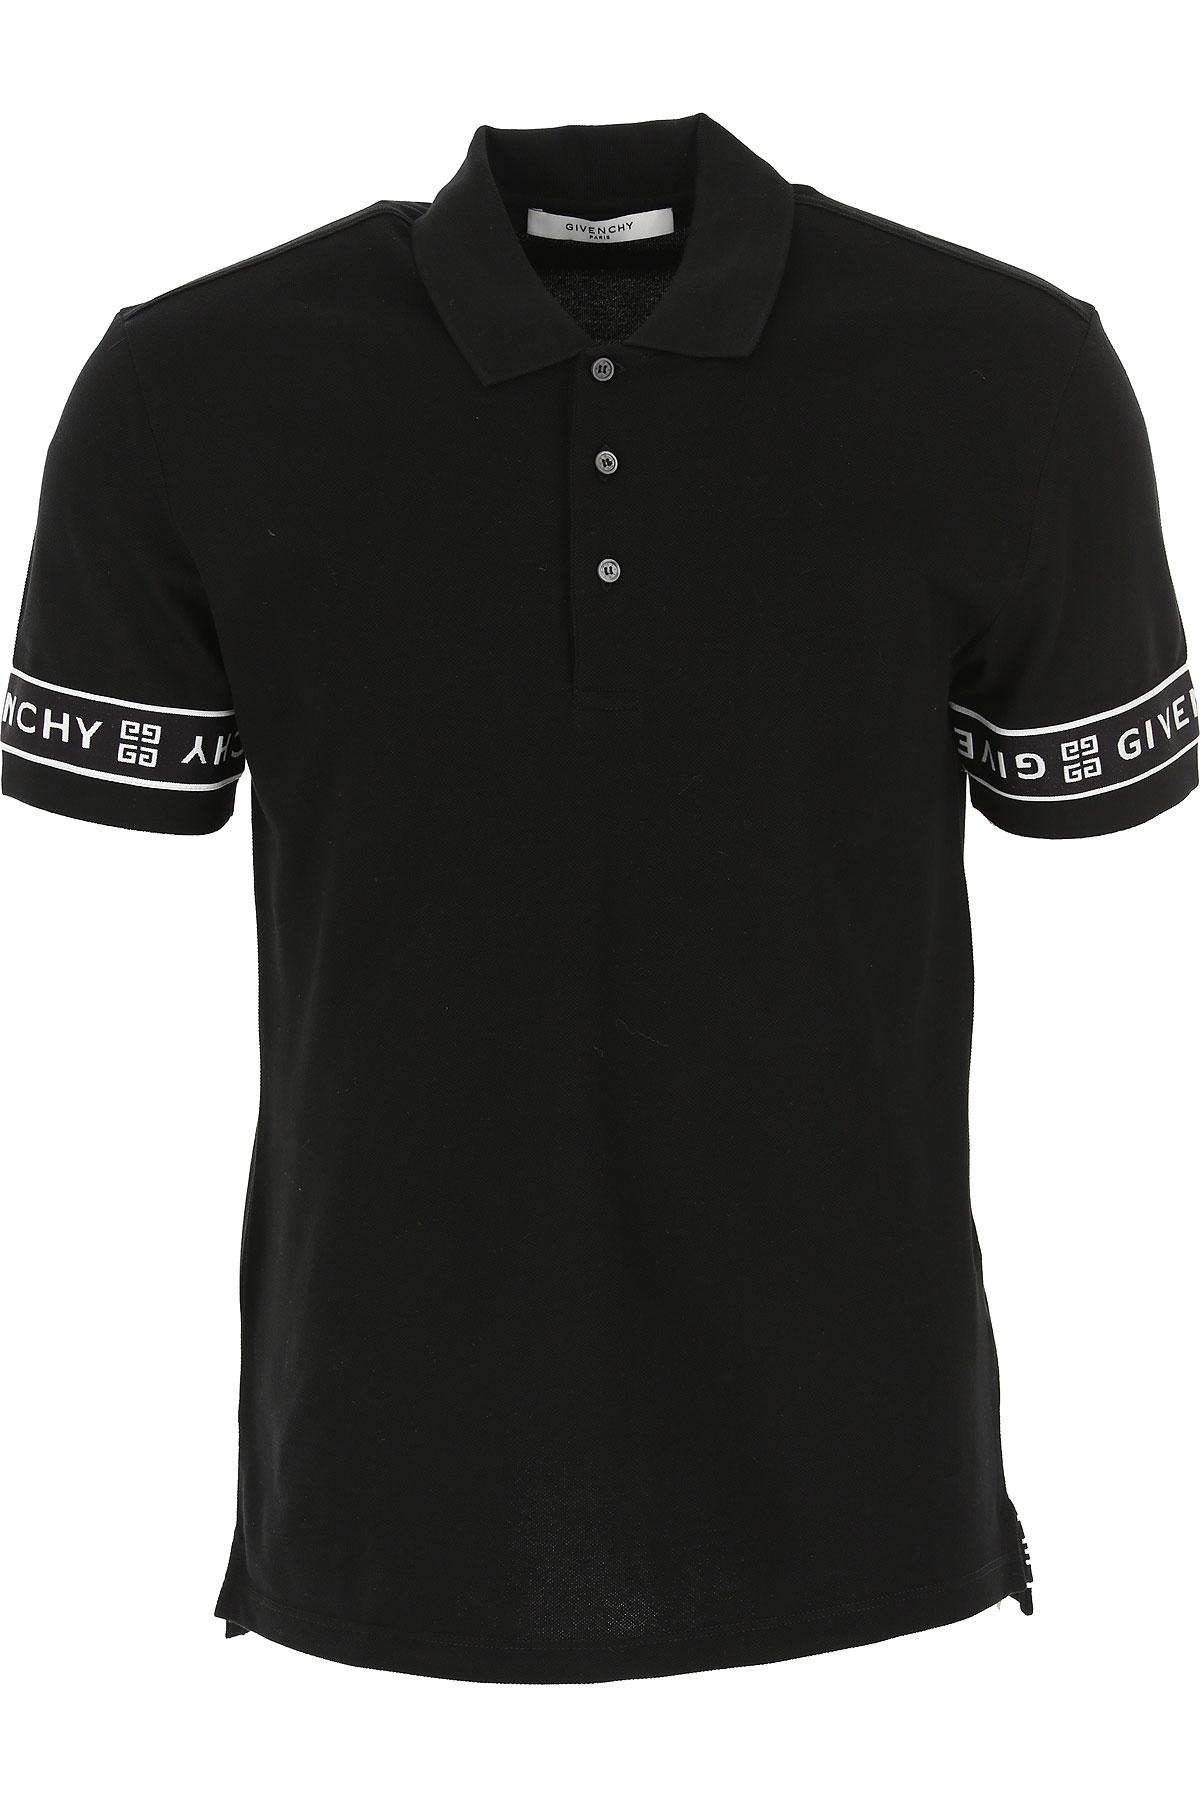 Givenchy Cotton Branded Polo Shirt in Black for Men - Save 10% - Lyst